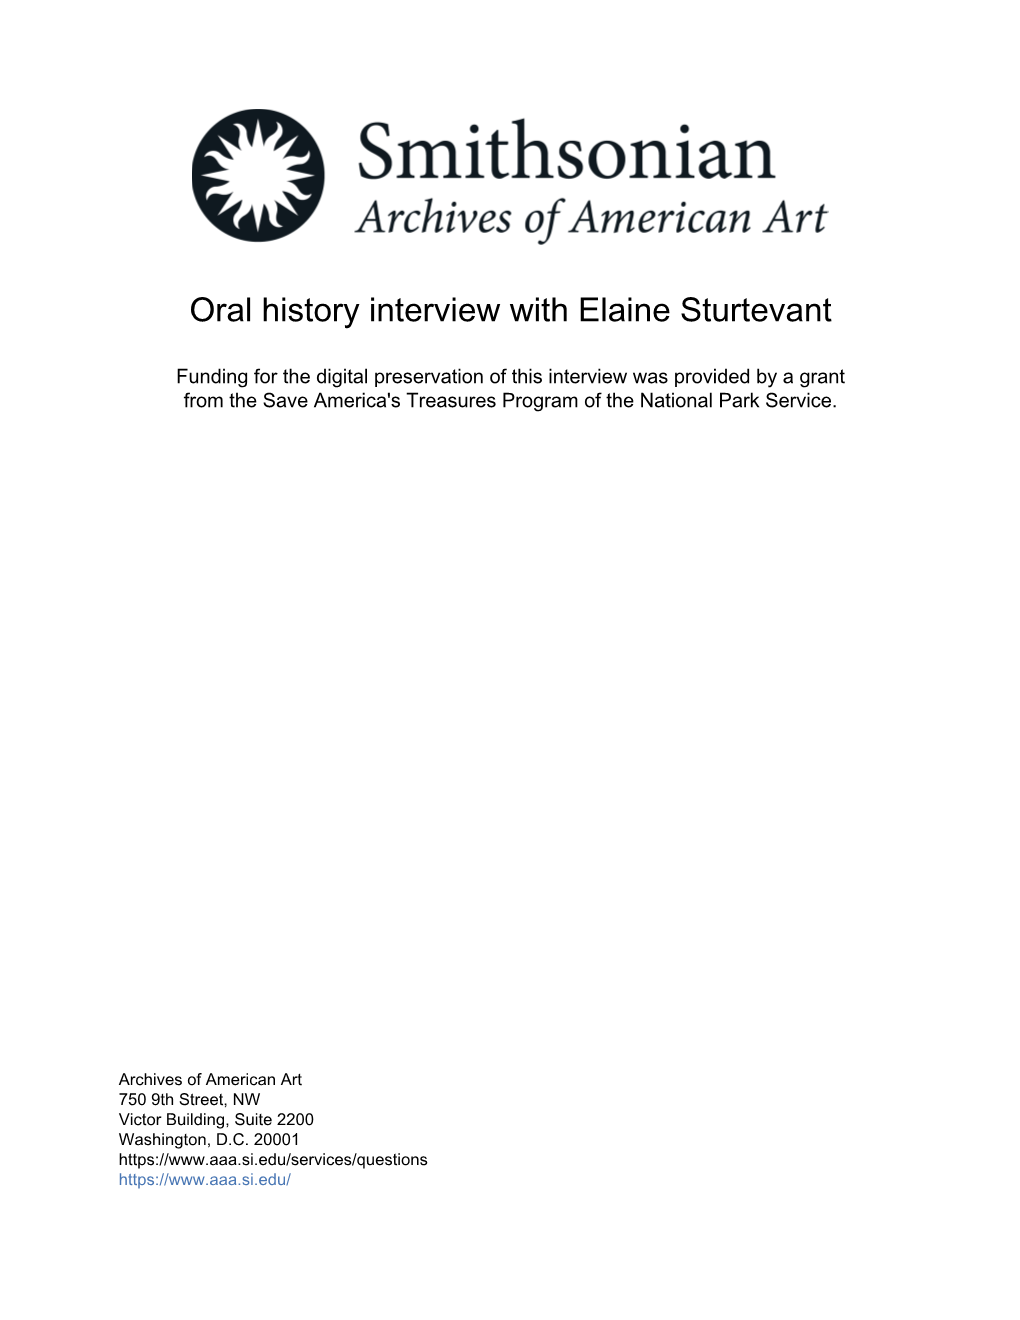 Oral History Interview with Elaine Sturtevant